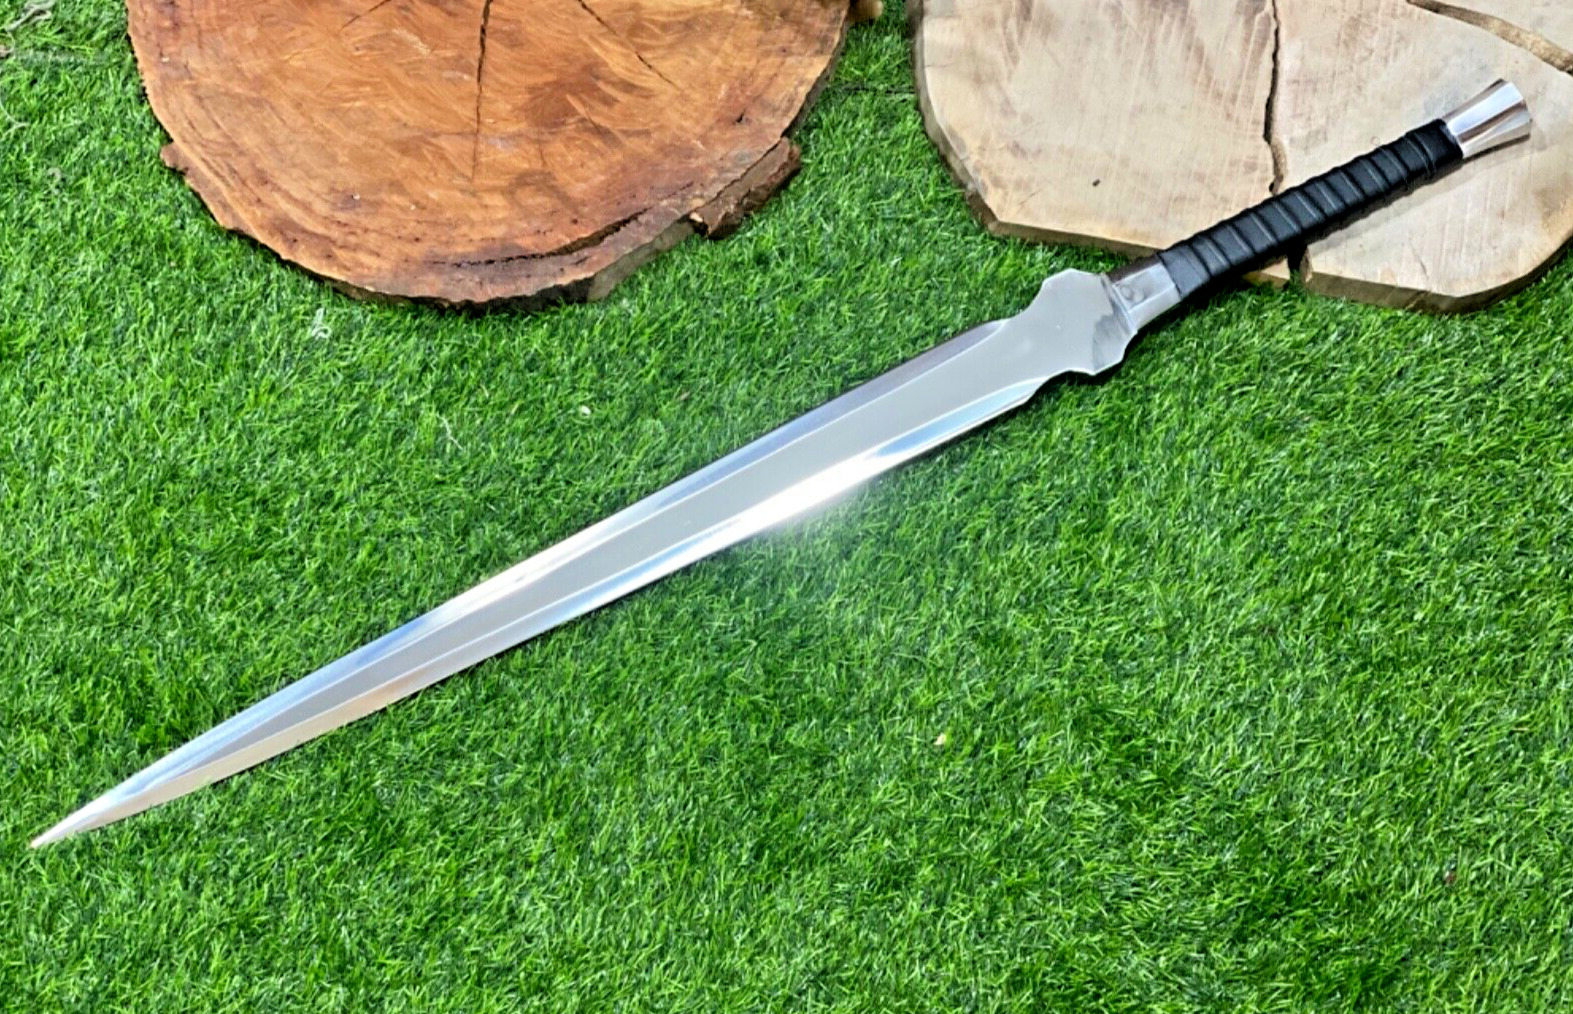 OUTSTANDING CUSTOM HANDMADE 30 INCHES LONG IN HIGH POLISHED STEEL HUNTING SWORD